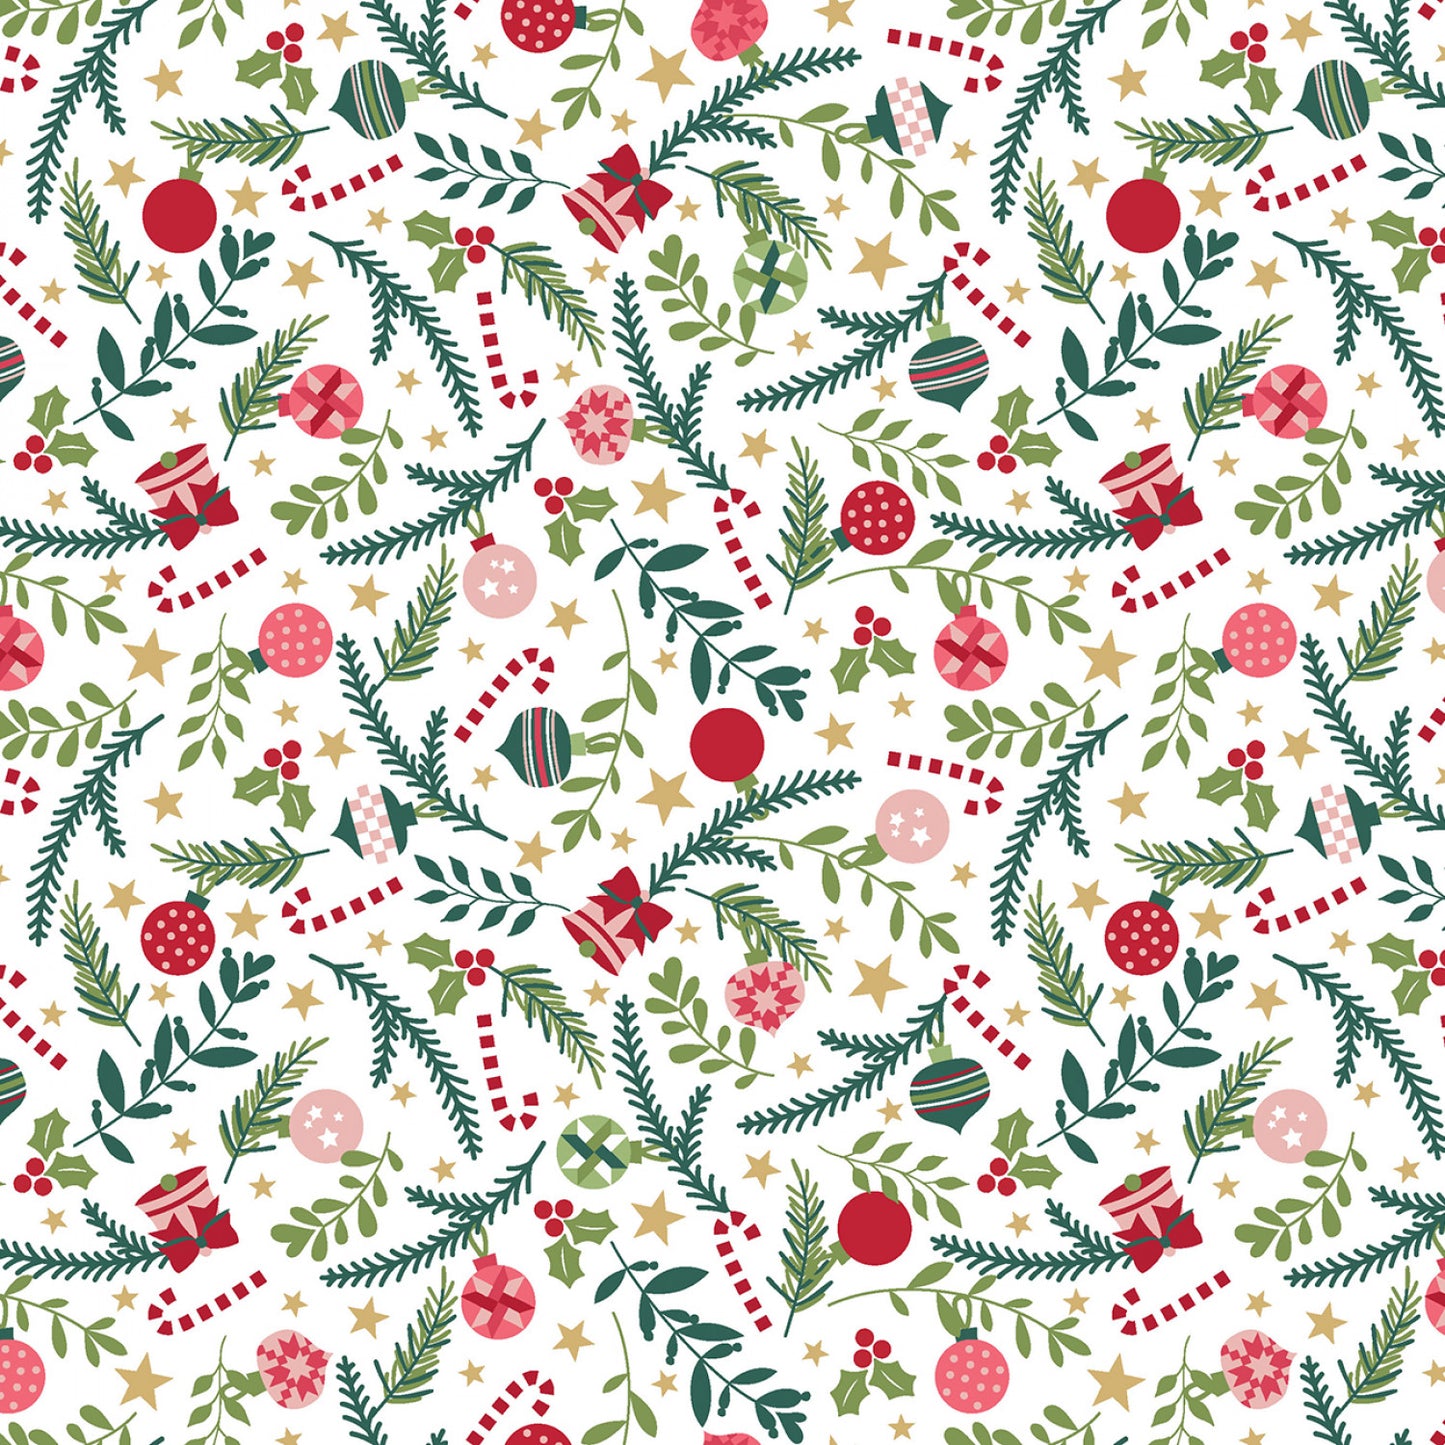 *PRE-ORDER* A Quilty Little Christmas Fabric Yardage By Kimberbell